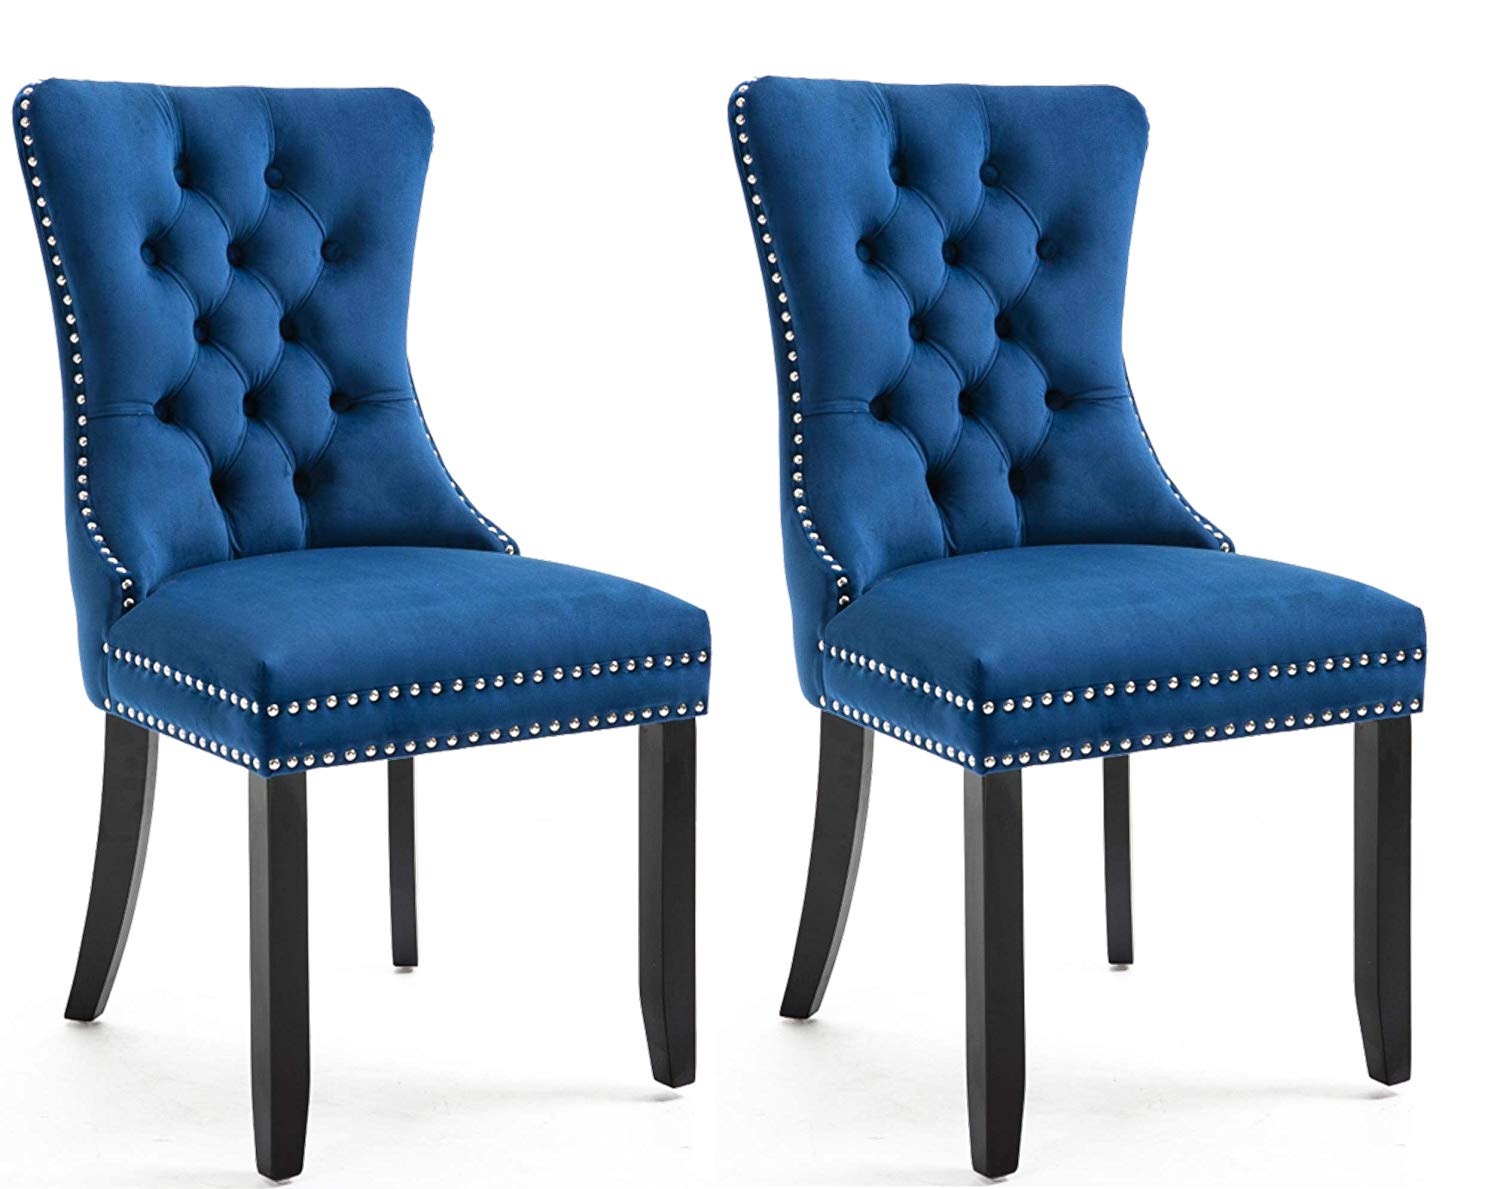 Blue and gold upholstered dining chair with tufted back - wide 7